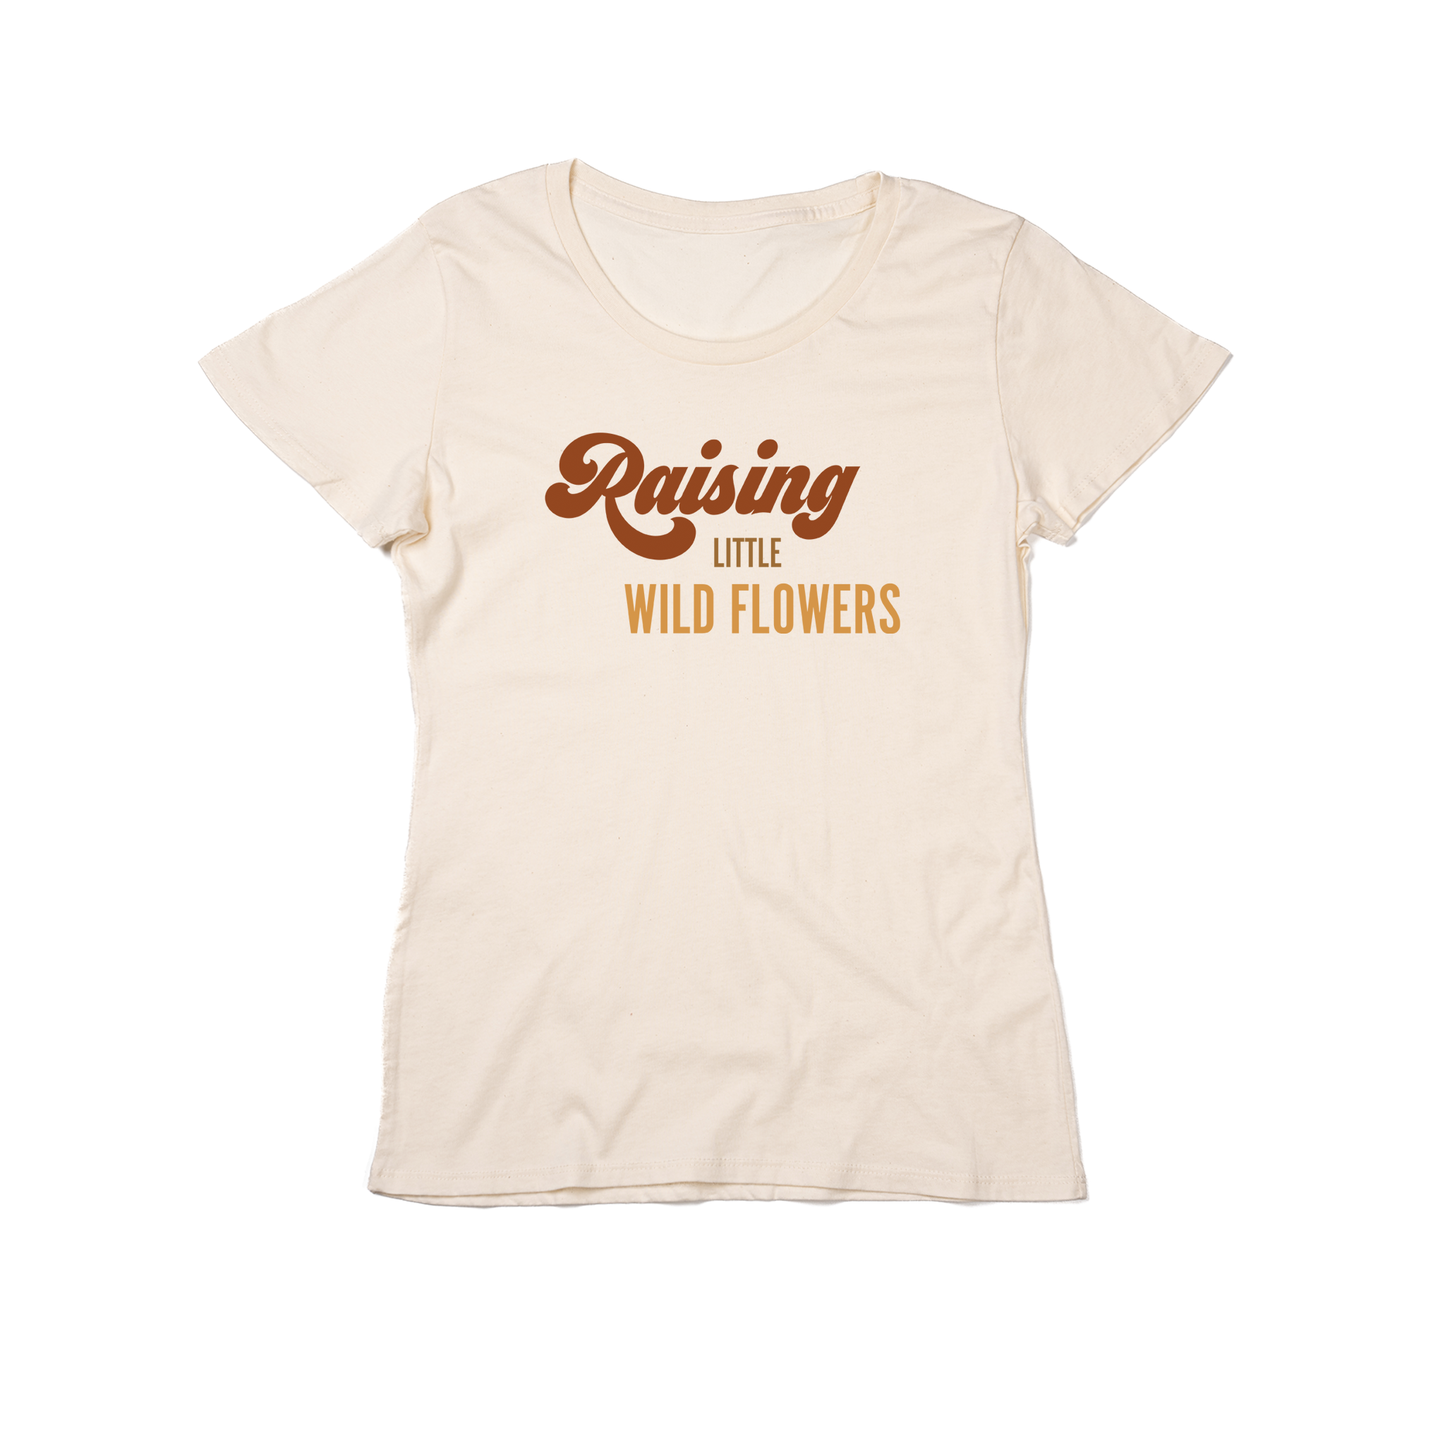 Raising Little Wild Flowers - Women's Fitted Tee (Natural)